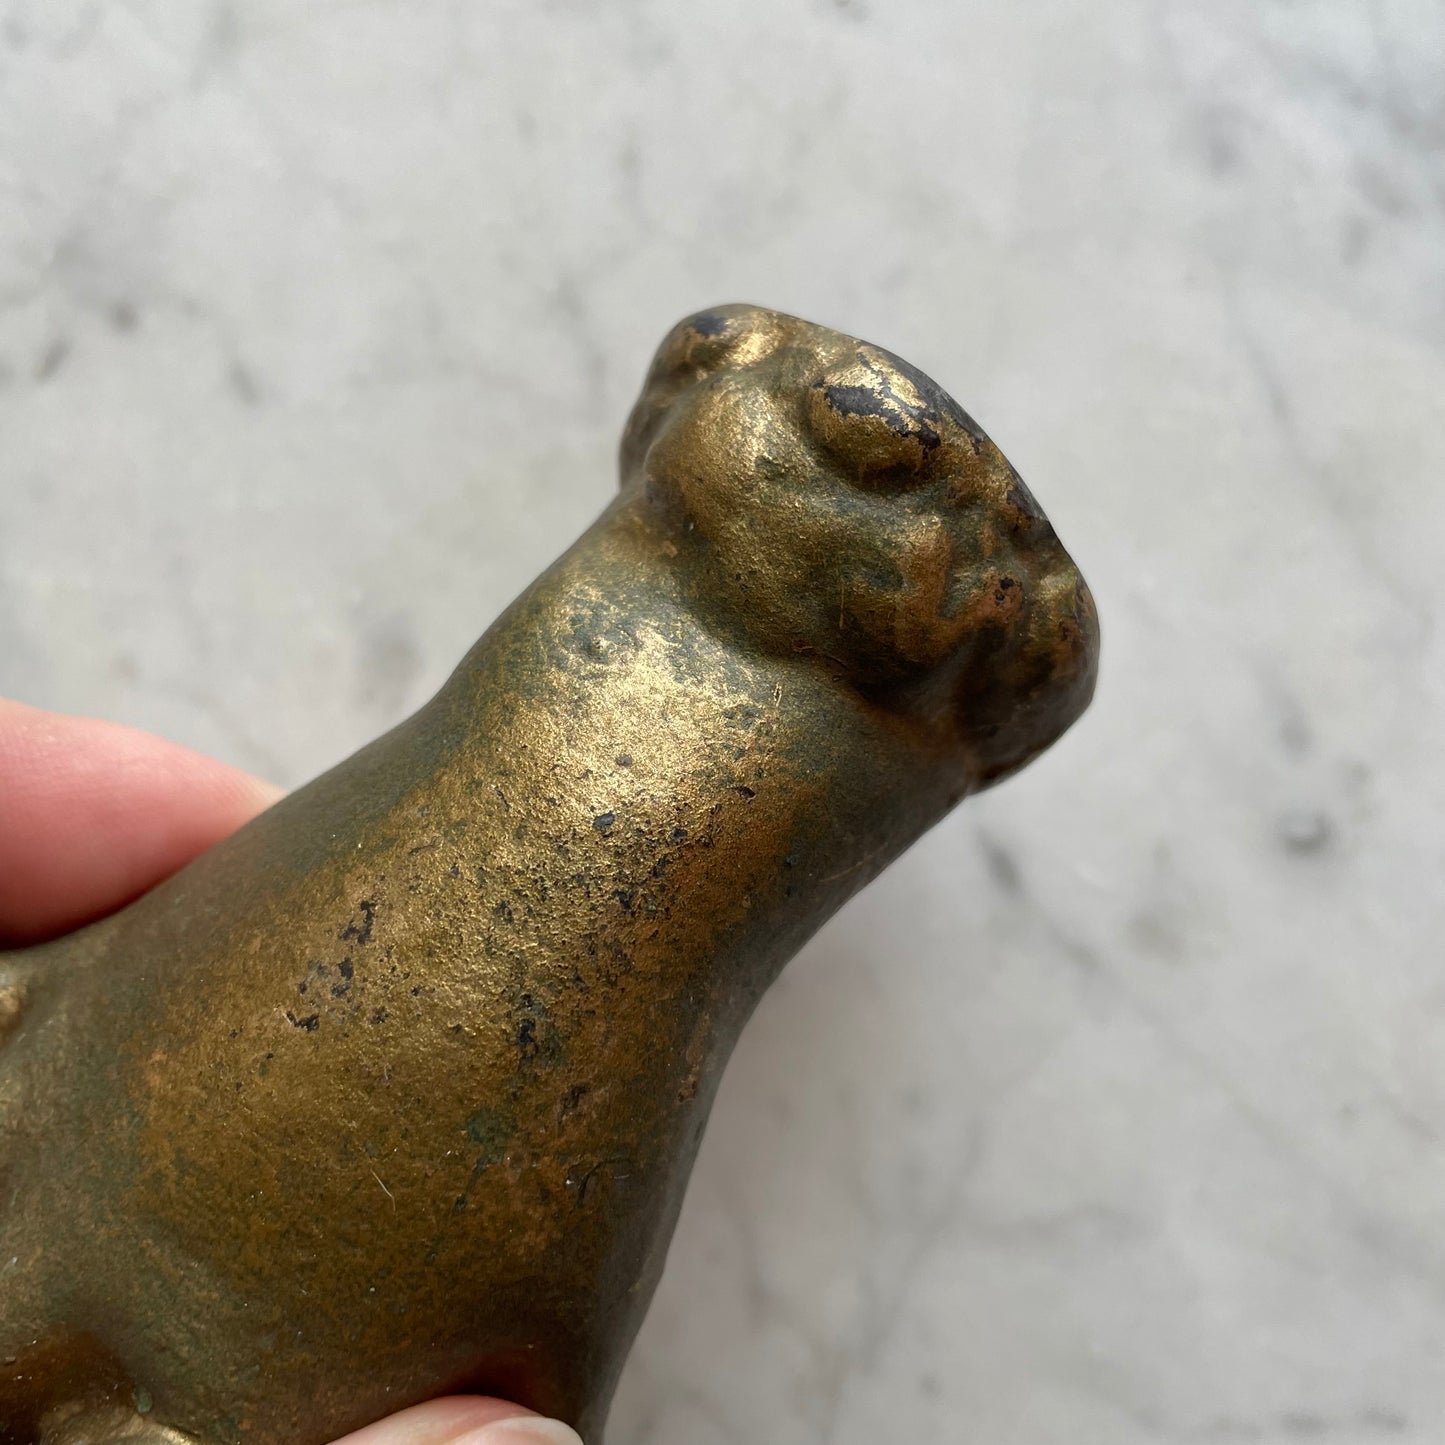 Antique Cast Iron Hand Paperweight